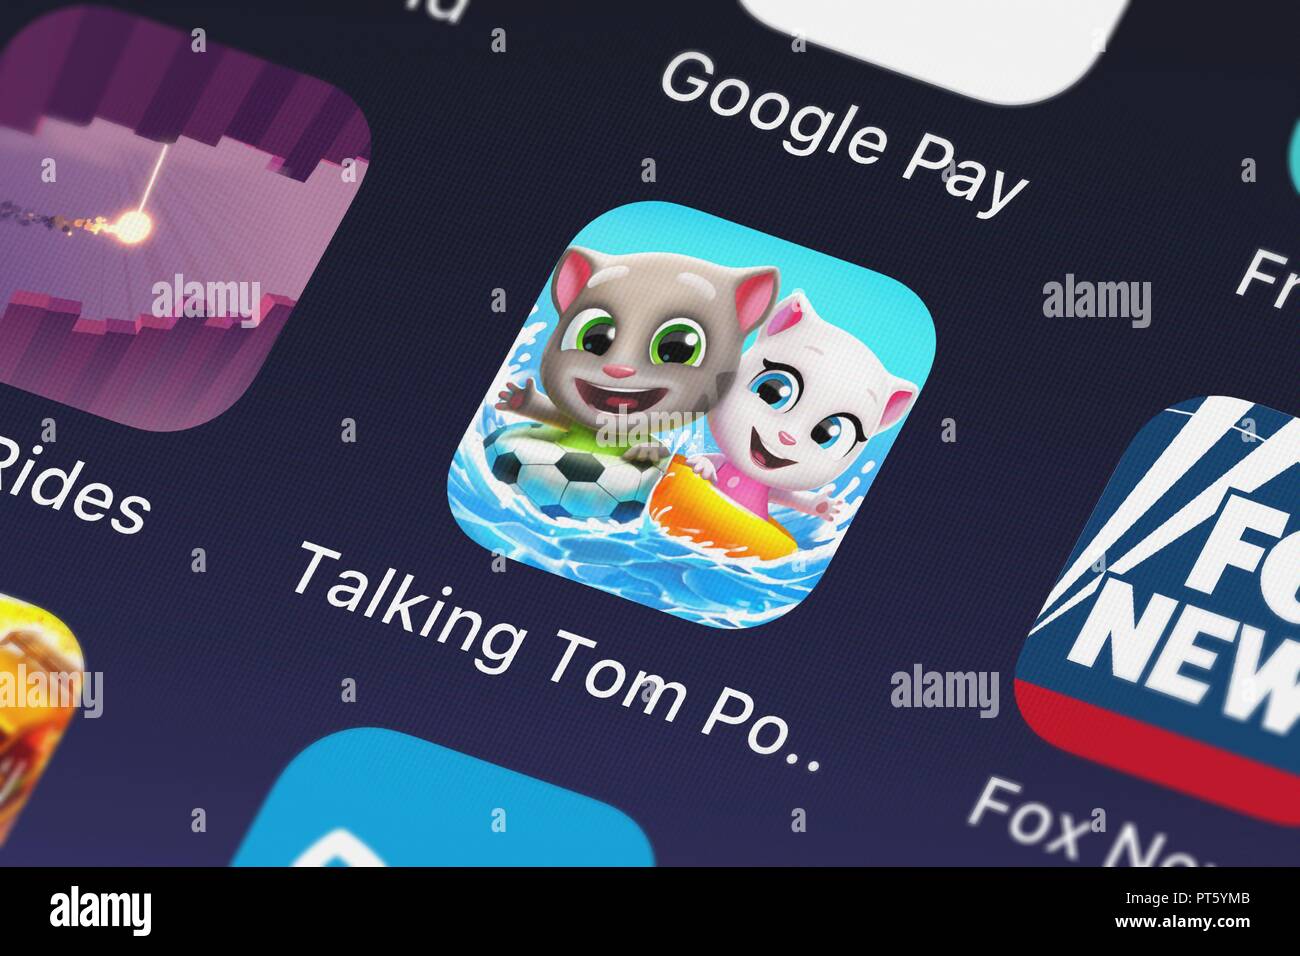 London United Kingdom October 06 18 Close Up Shot Of Outfit7 Limited S Popular App Talking Tom Pool Stock Photo Alamy